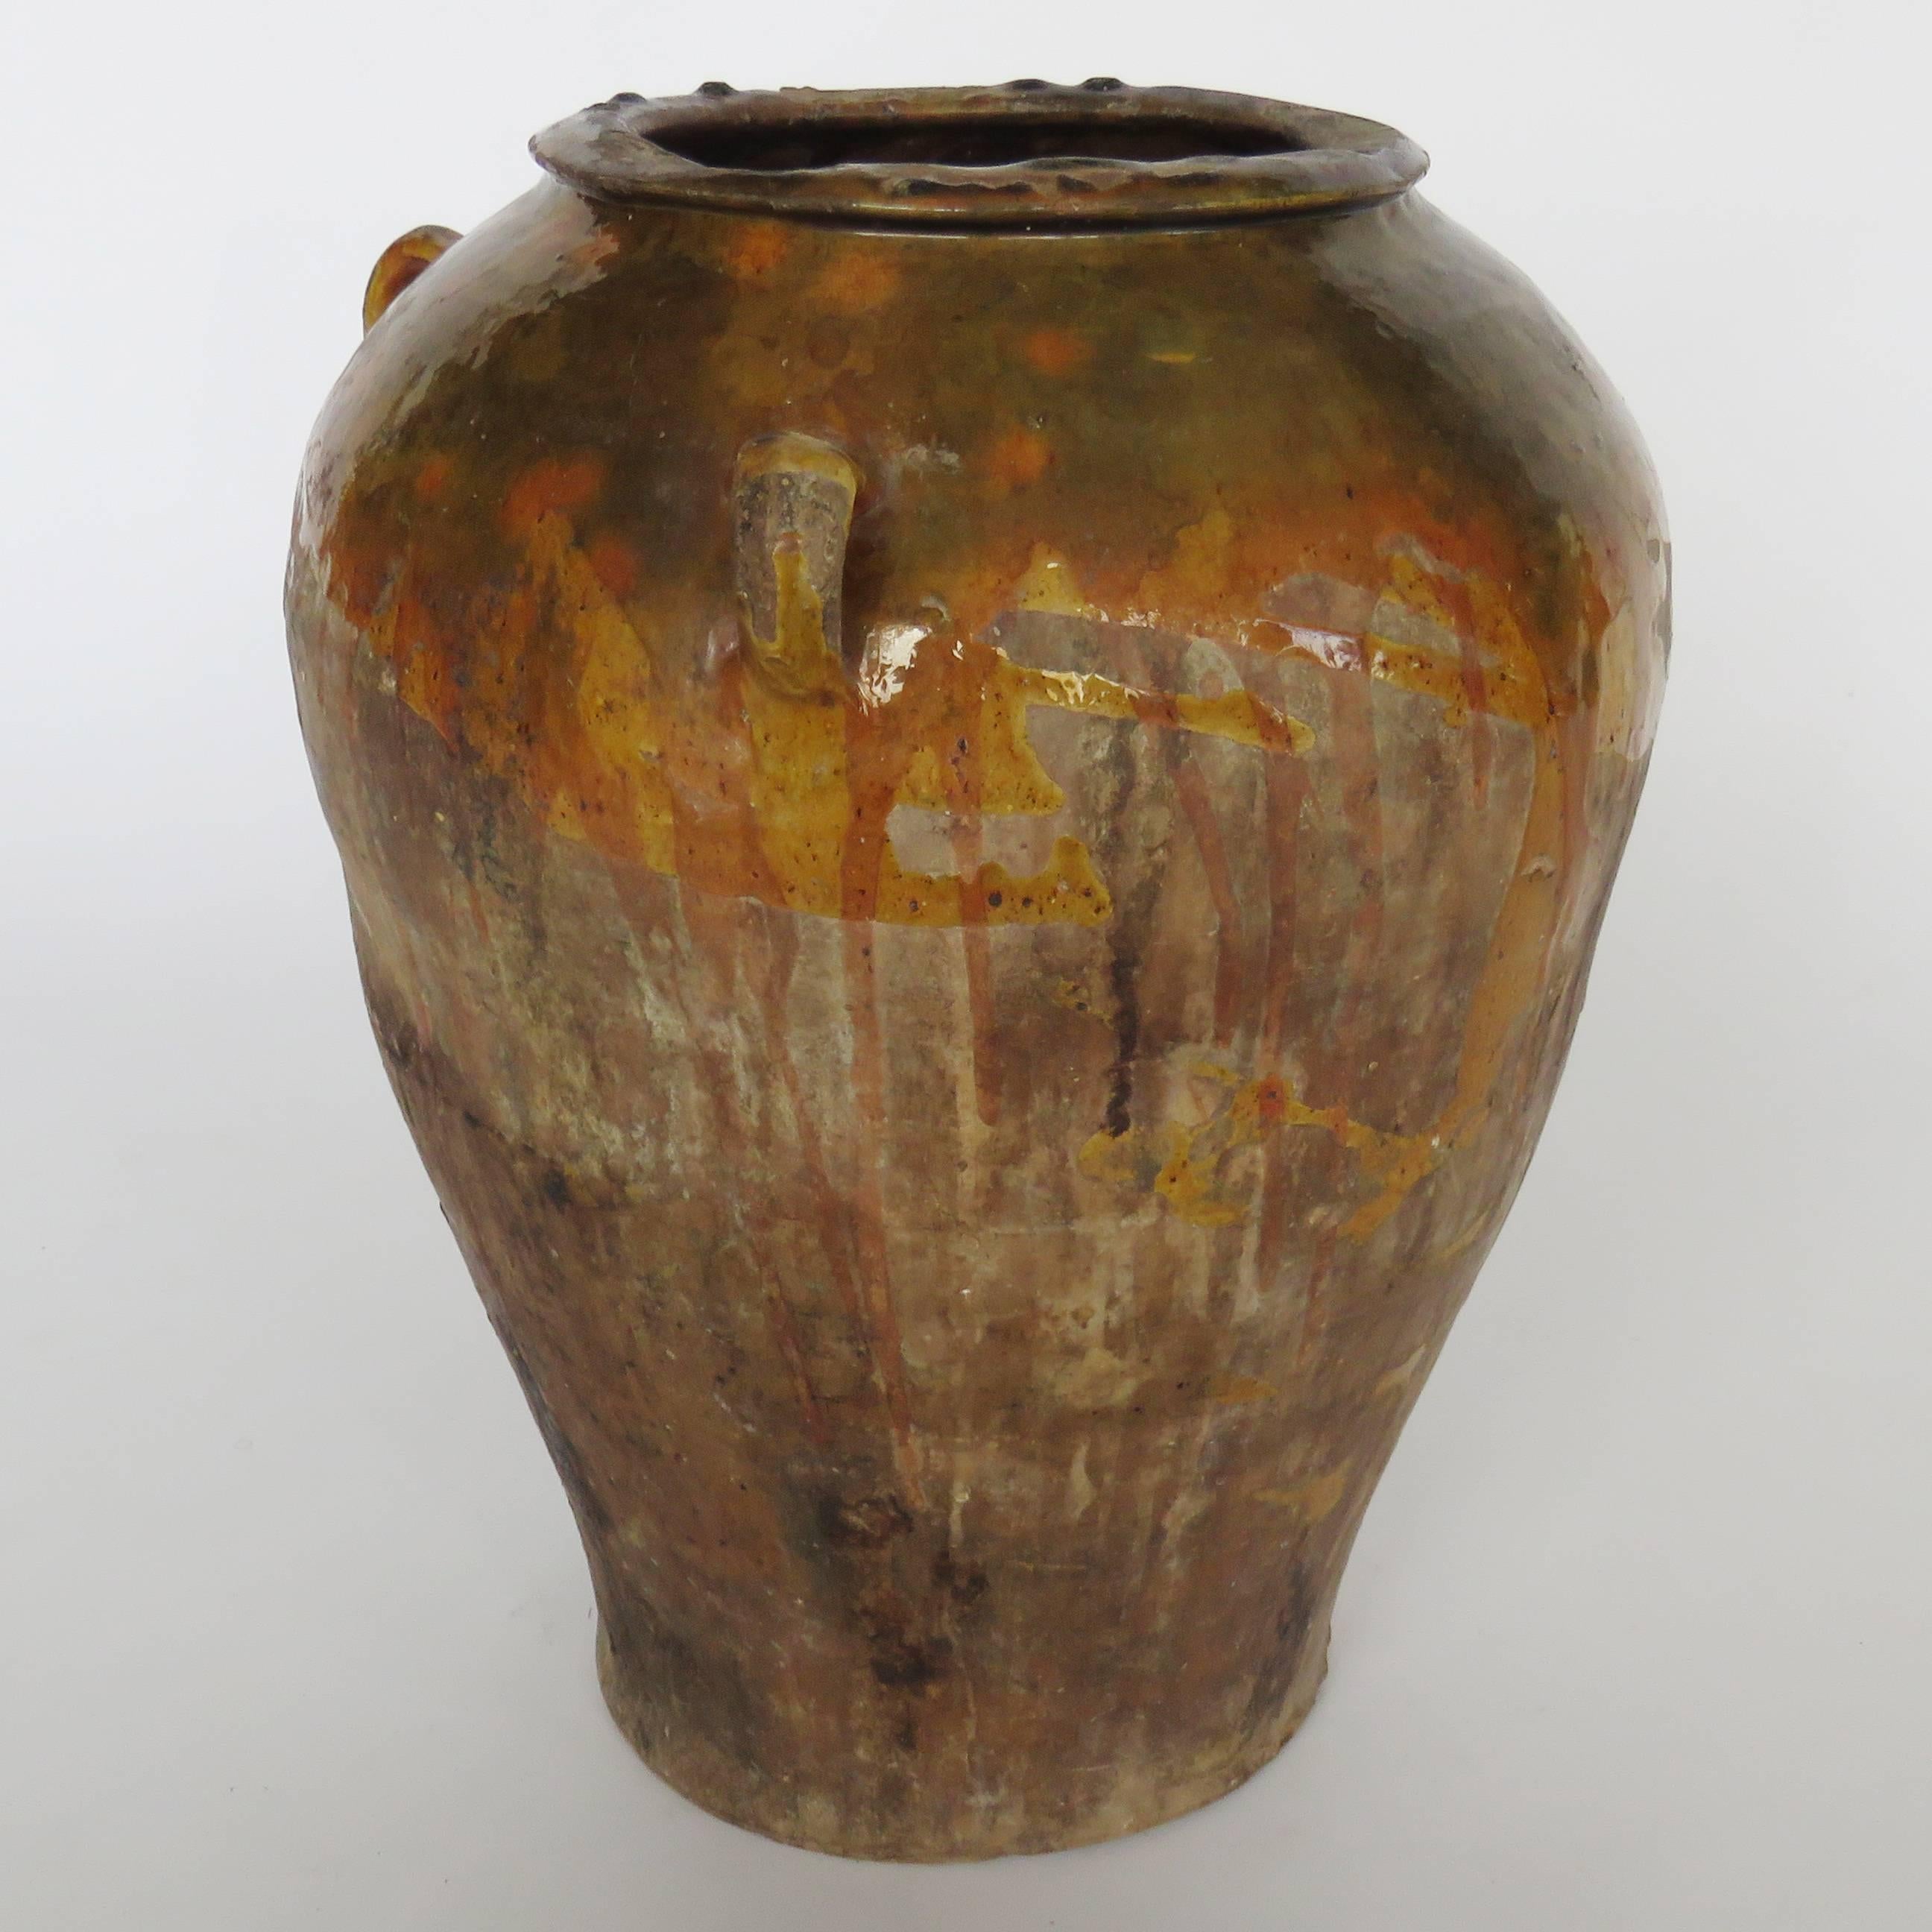 Hand coiled pot with handles decorated with forest green and rust brown drippy glaze around neck.

Shipping costs per item diminish with purchases of additional items. 
Photo of collection of pots it is to show more are available. Other pots are